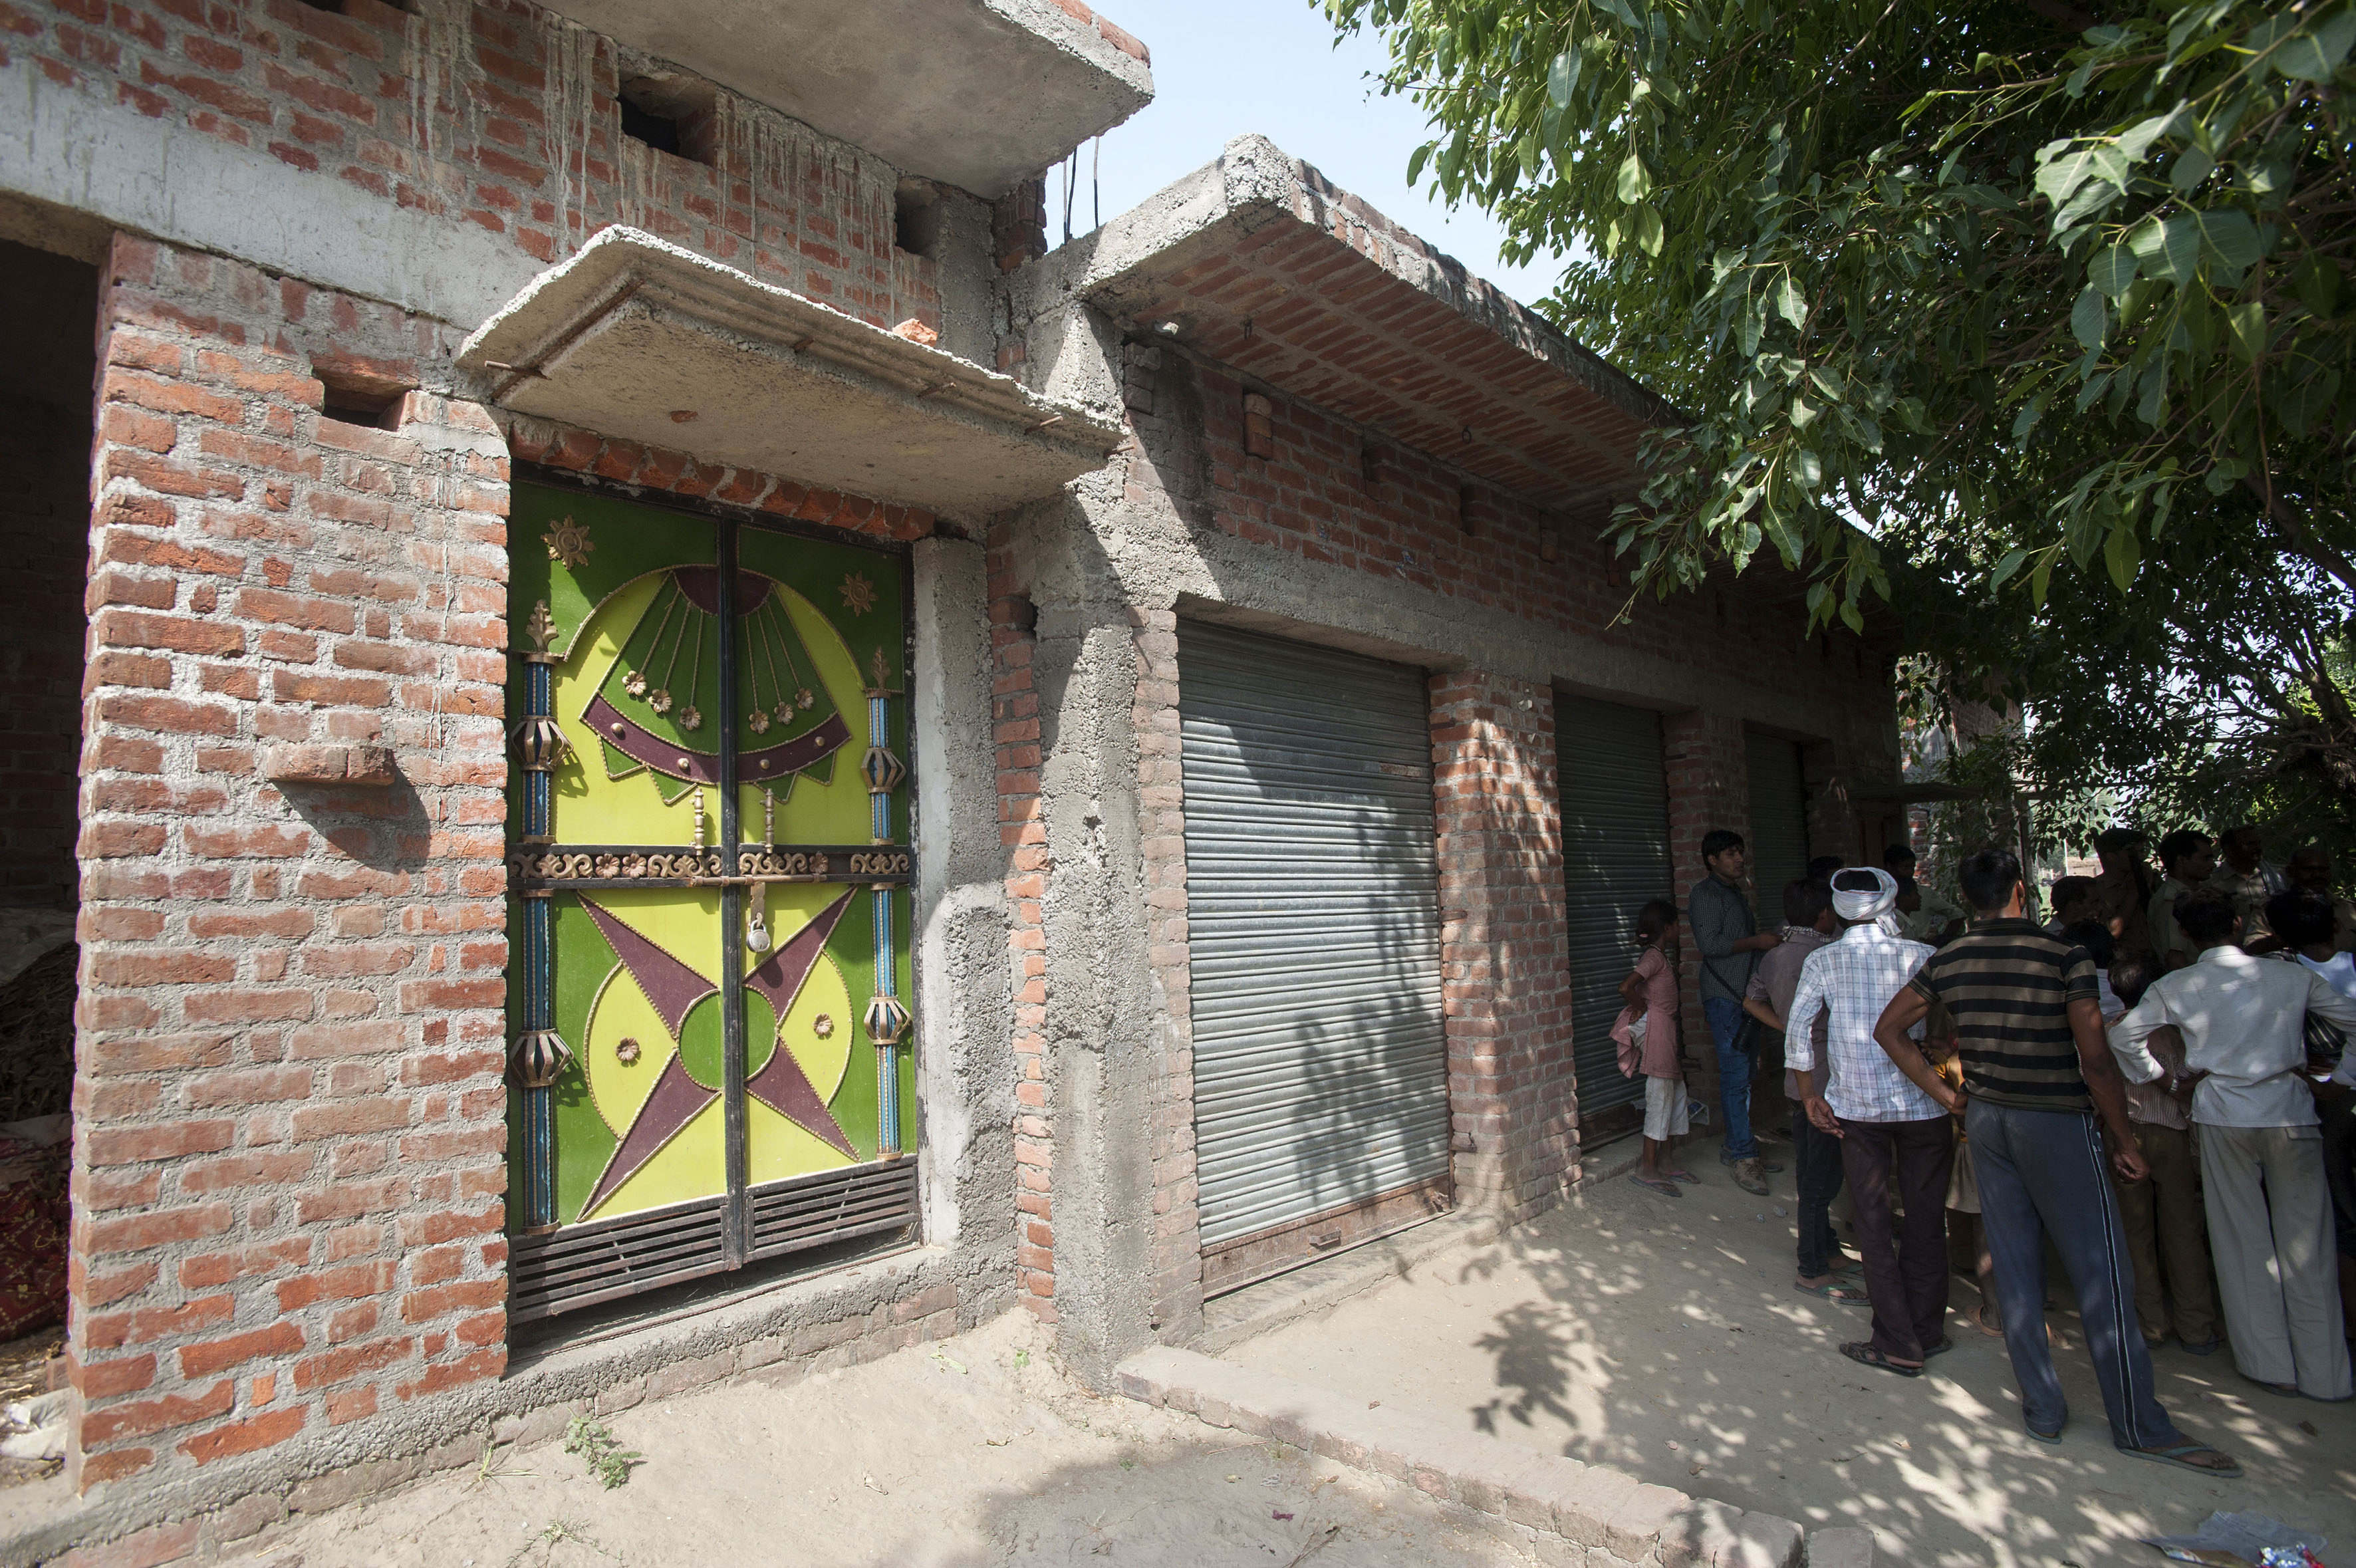 A view of the locked farmhouse of the three brothers (Avadesh, Urvesh and Pappu Yadav) accused in the rape and murder of two teenage girls in Katra Sadatganj village, Uttar Pradesh, India on May 30, 2014.